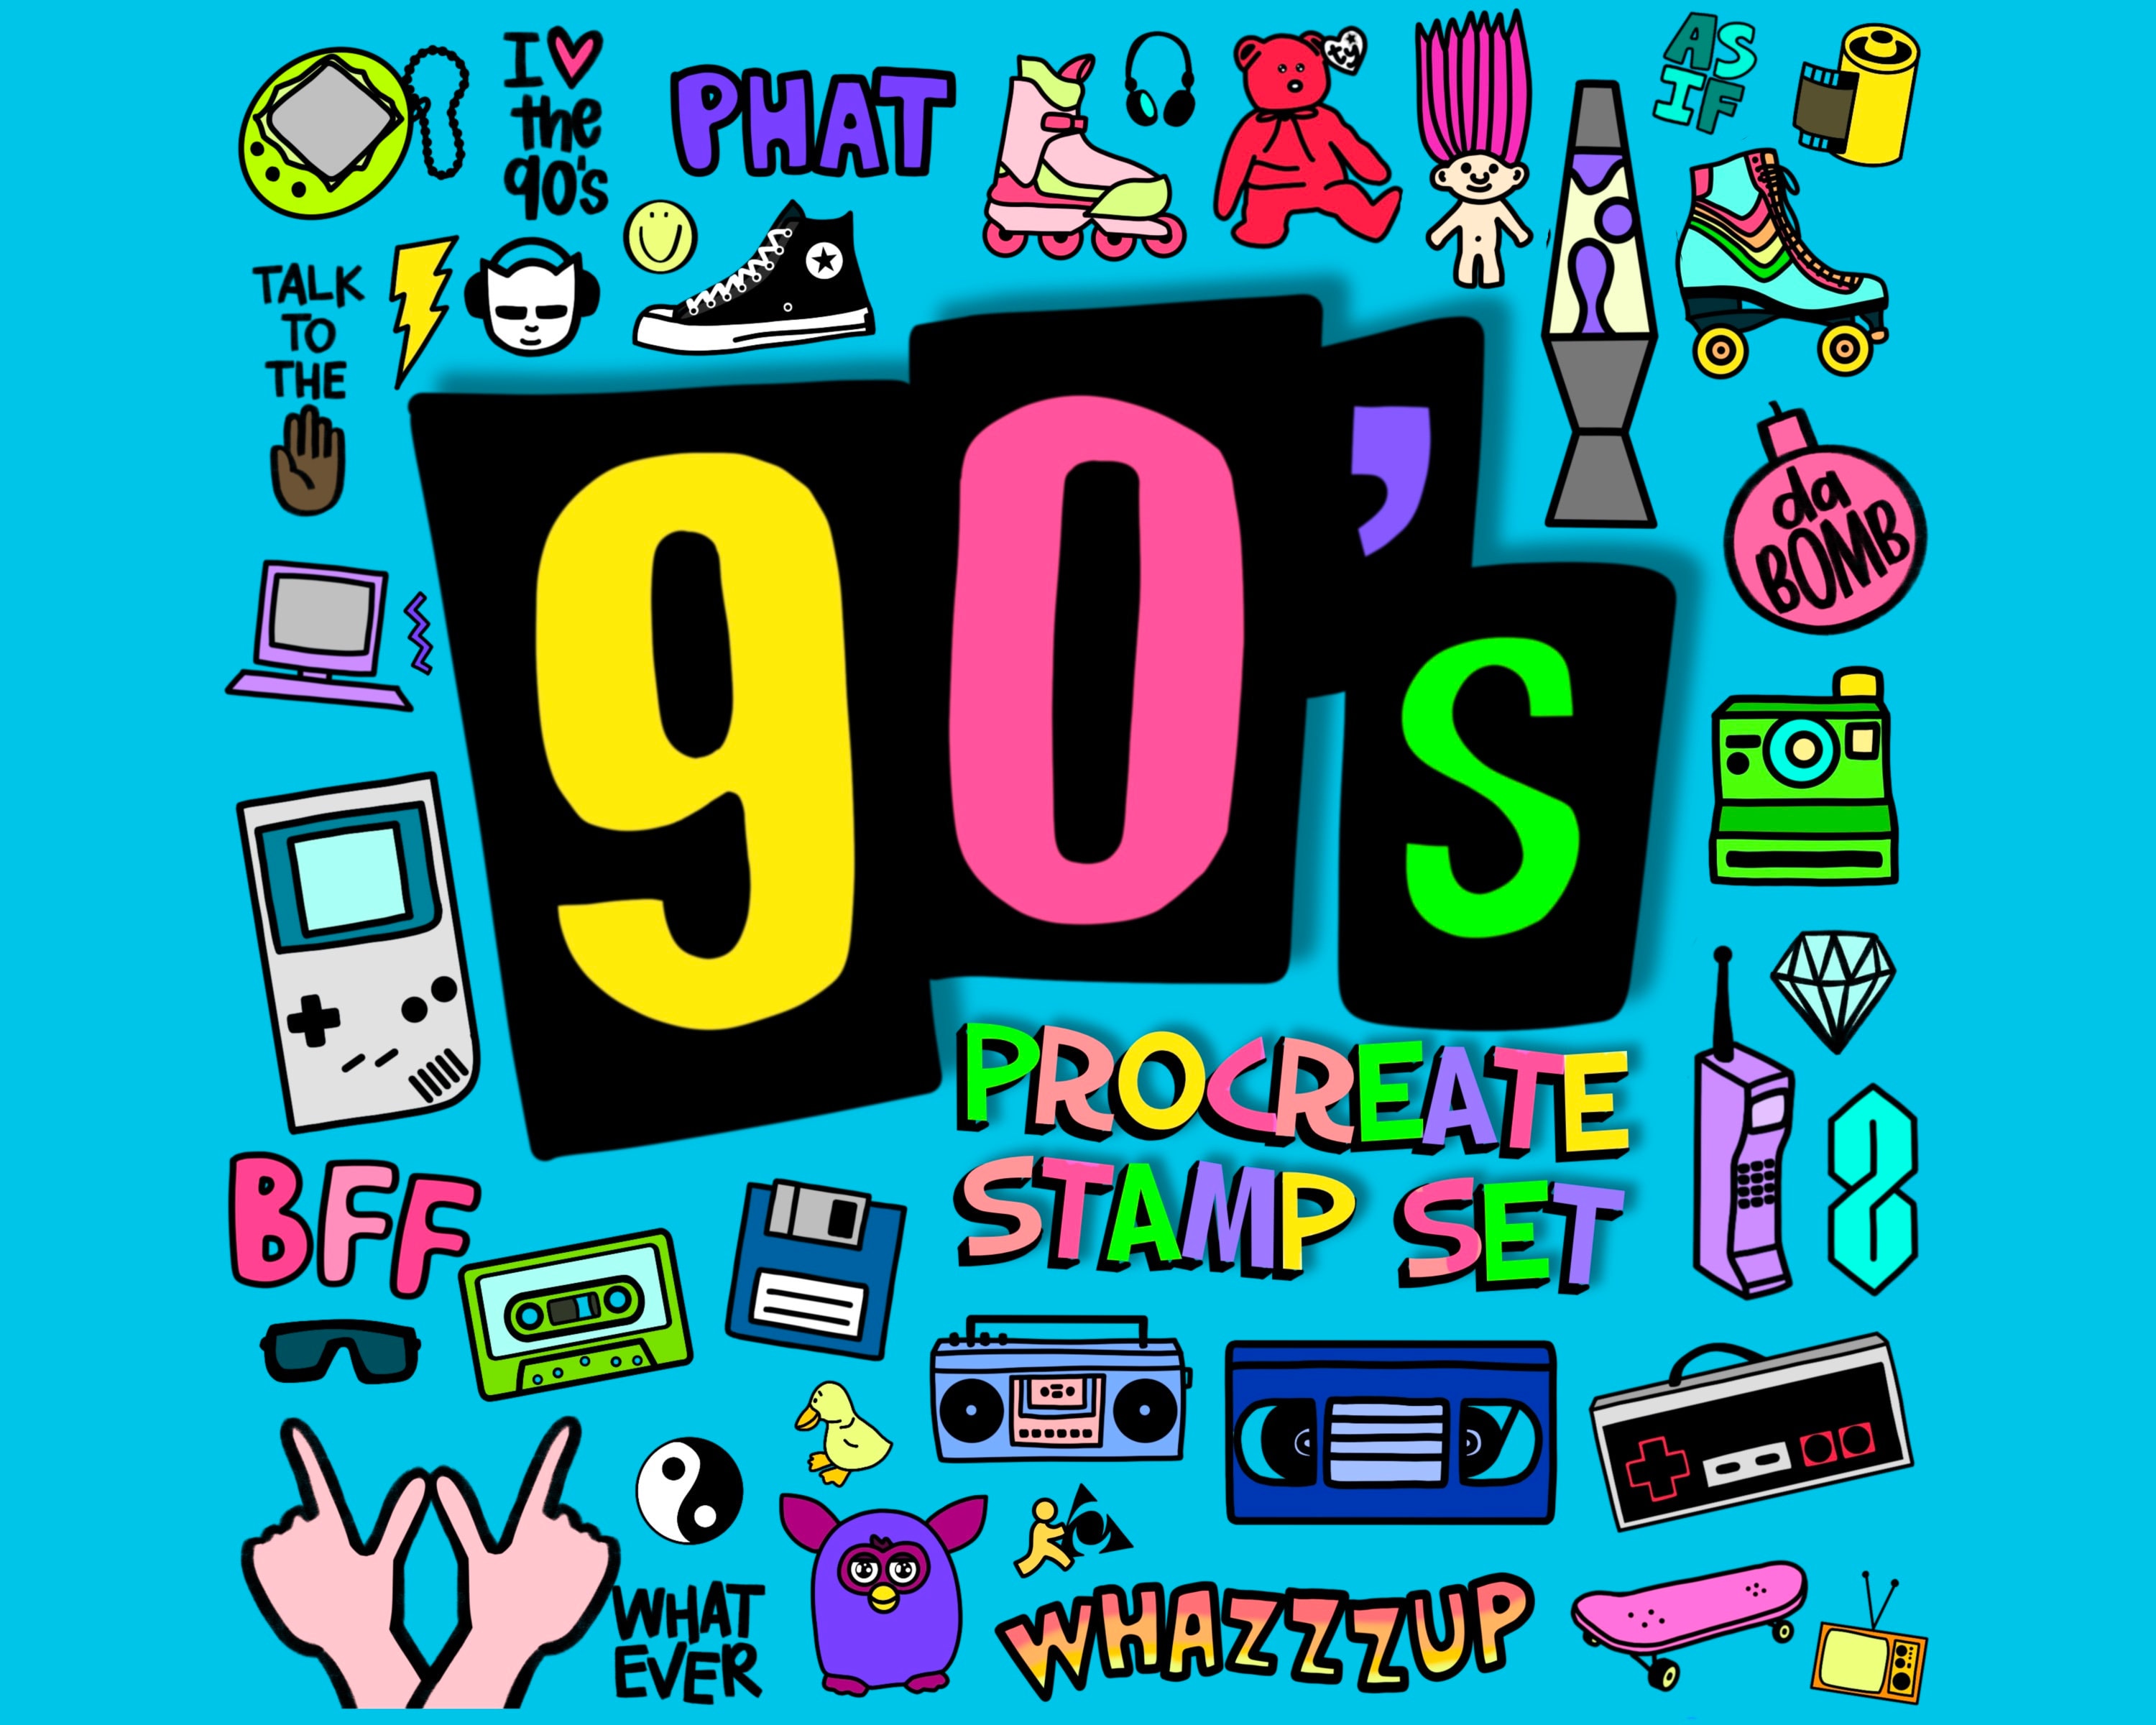 90's Clipart 90s Retro 90s Sticker Pack 90s SVG, PNG and JPG